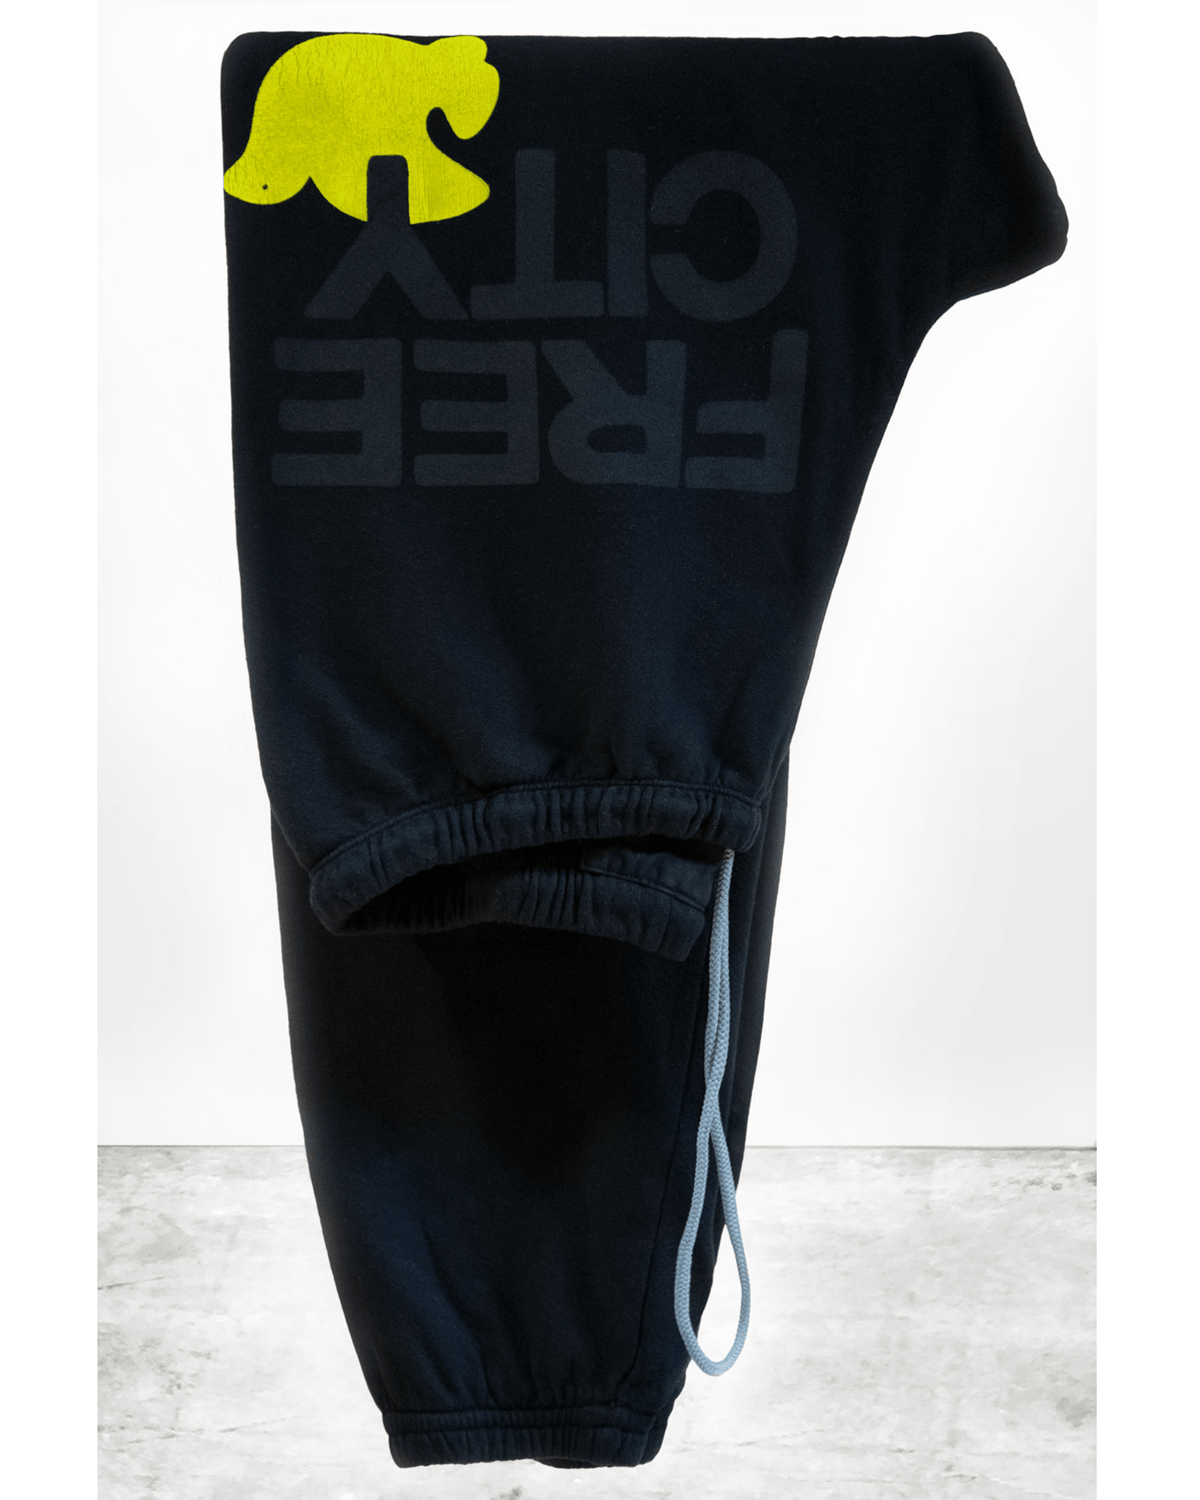 Free City Clothing Large Sweatpant in Squid Ink